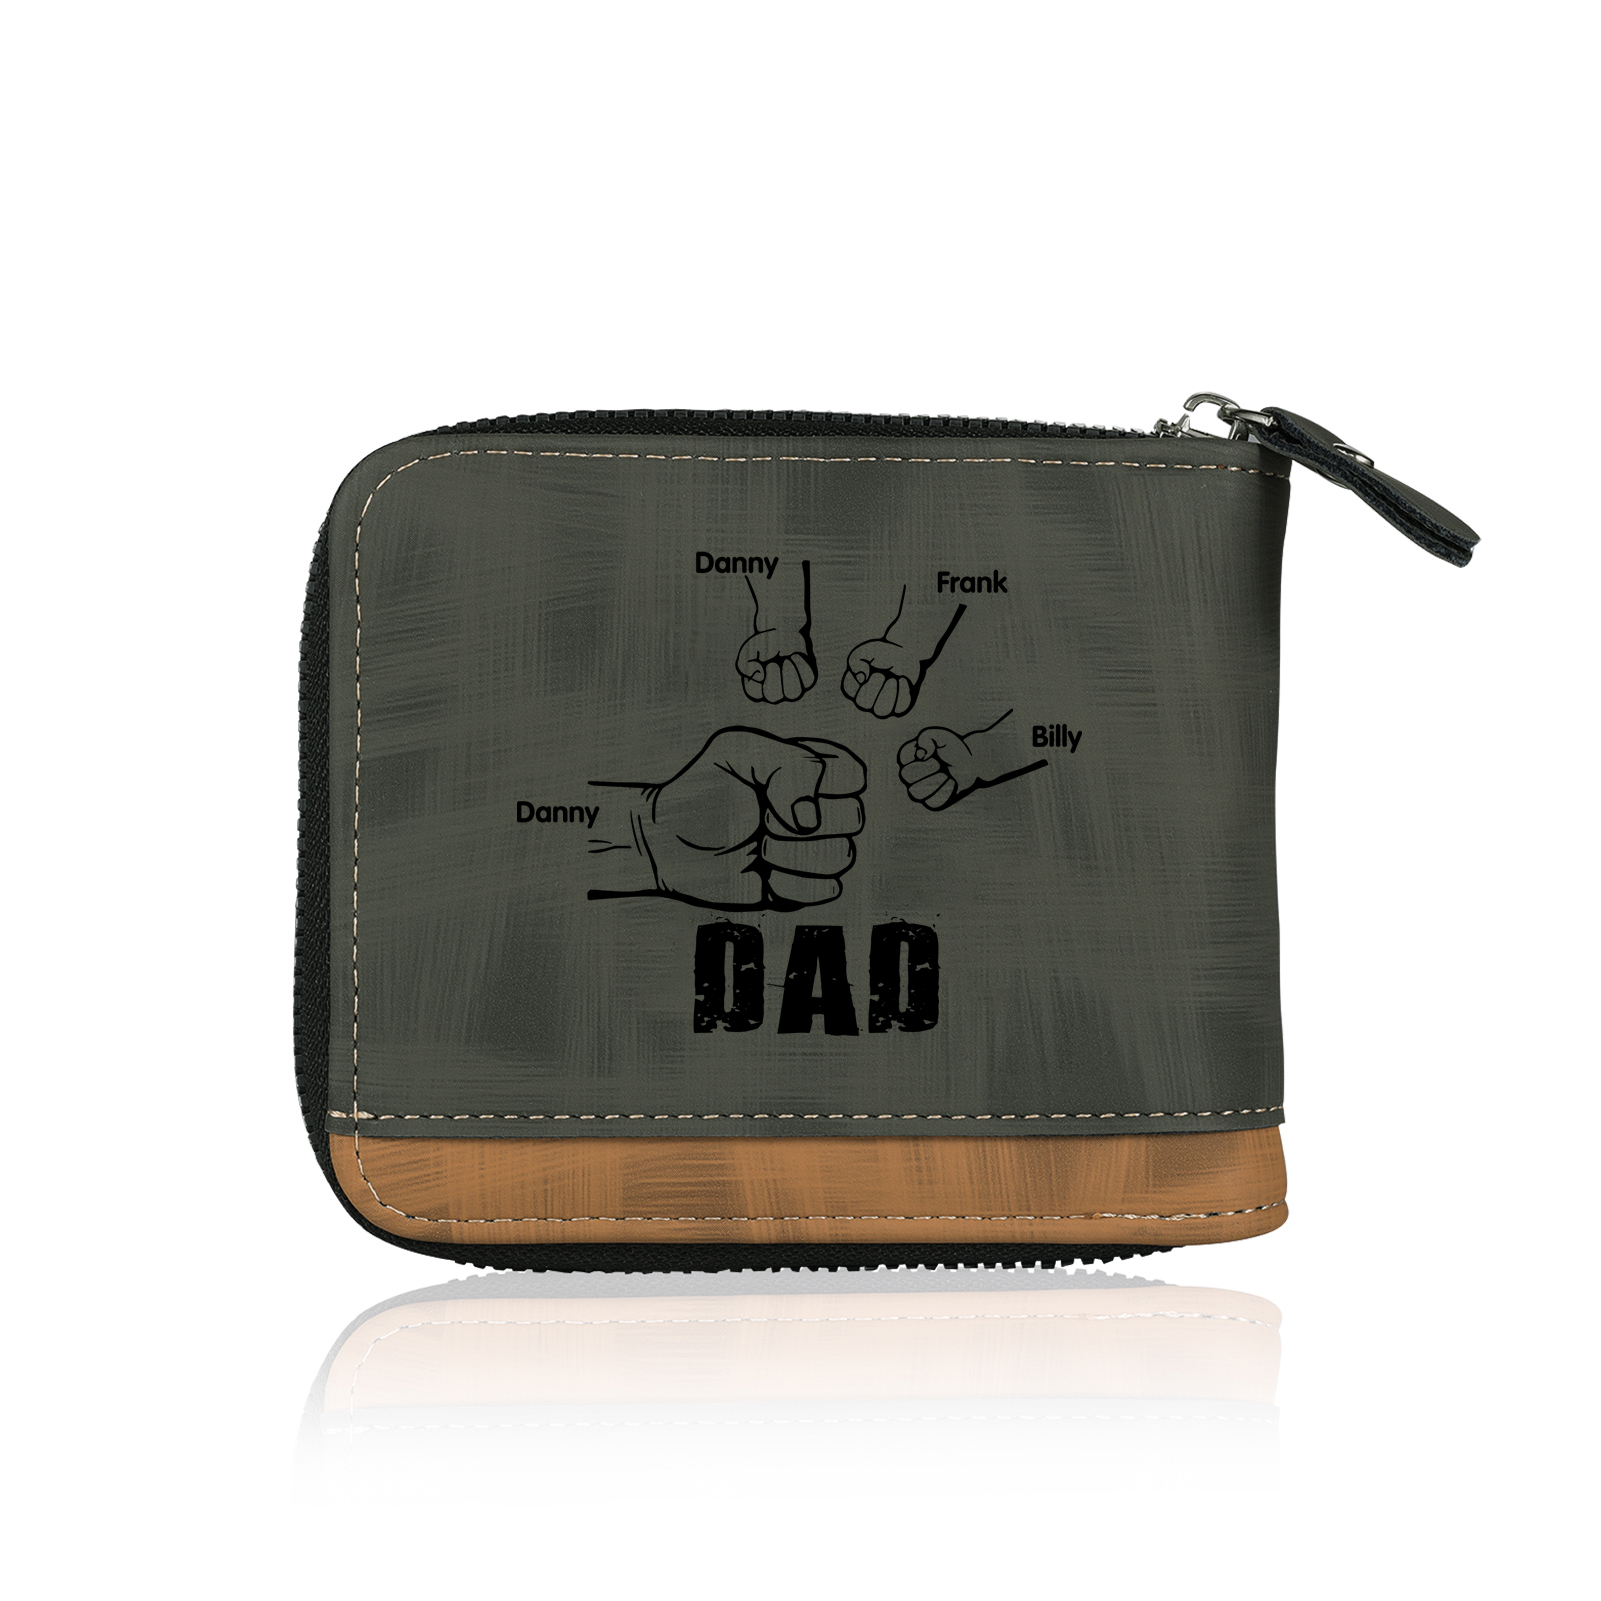 4 Names - Personalized Photo Custom Leather Men's Zipper Wallet as a Father's Day Gift for Dad